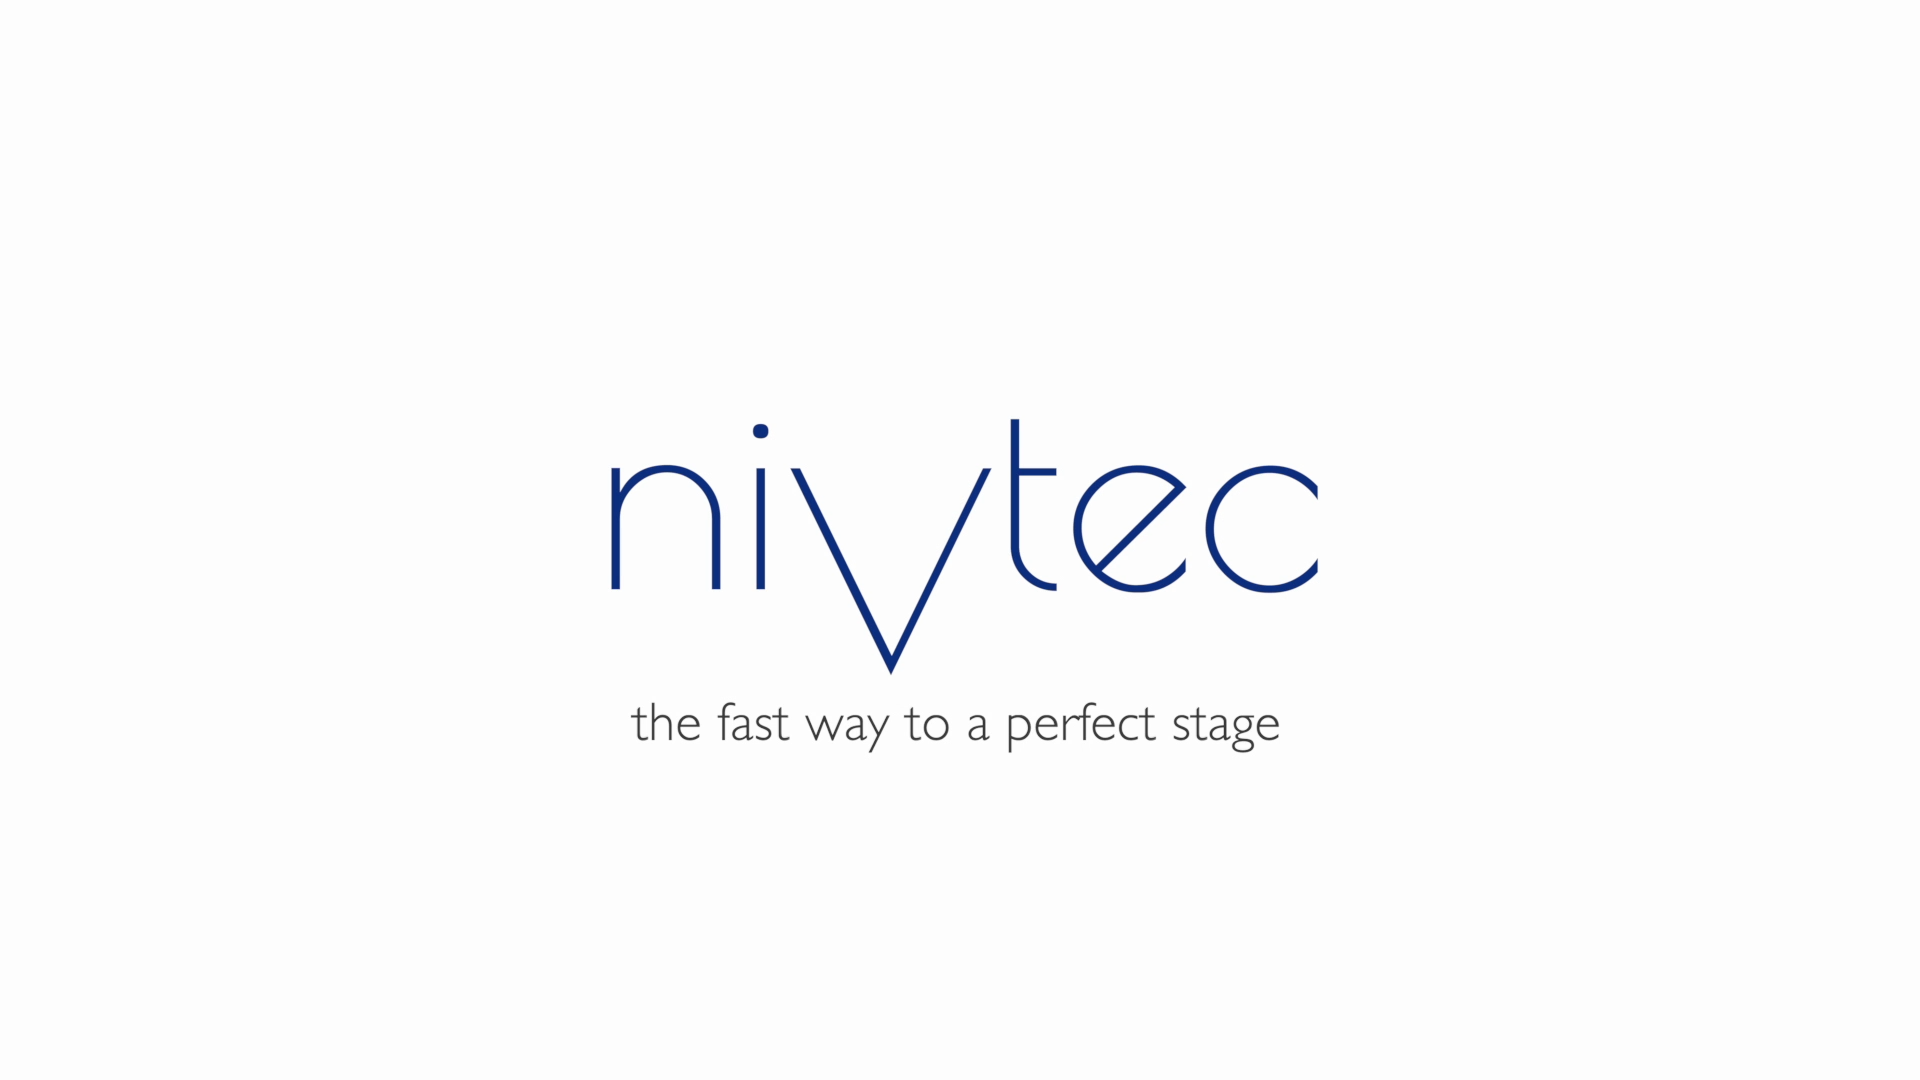 nivtec - the fast way